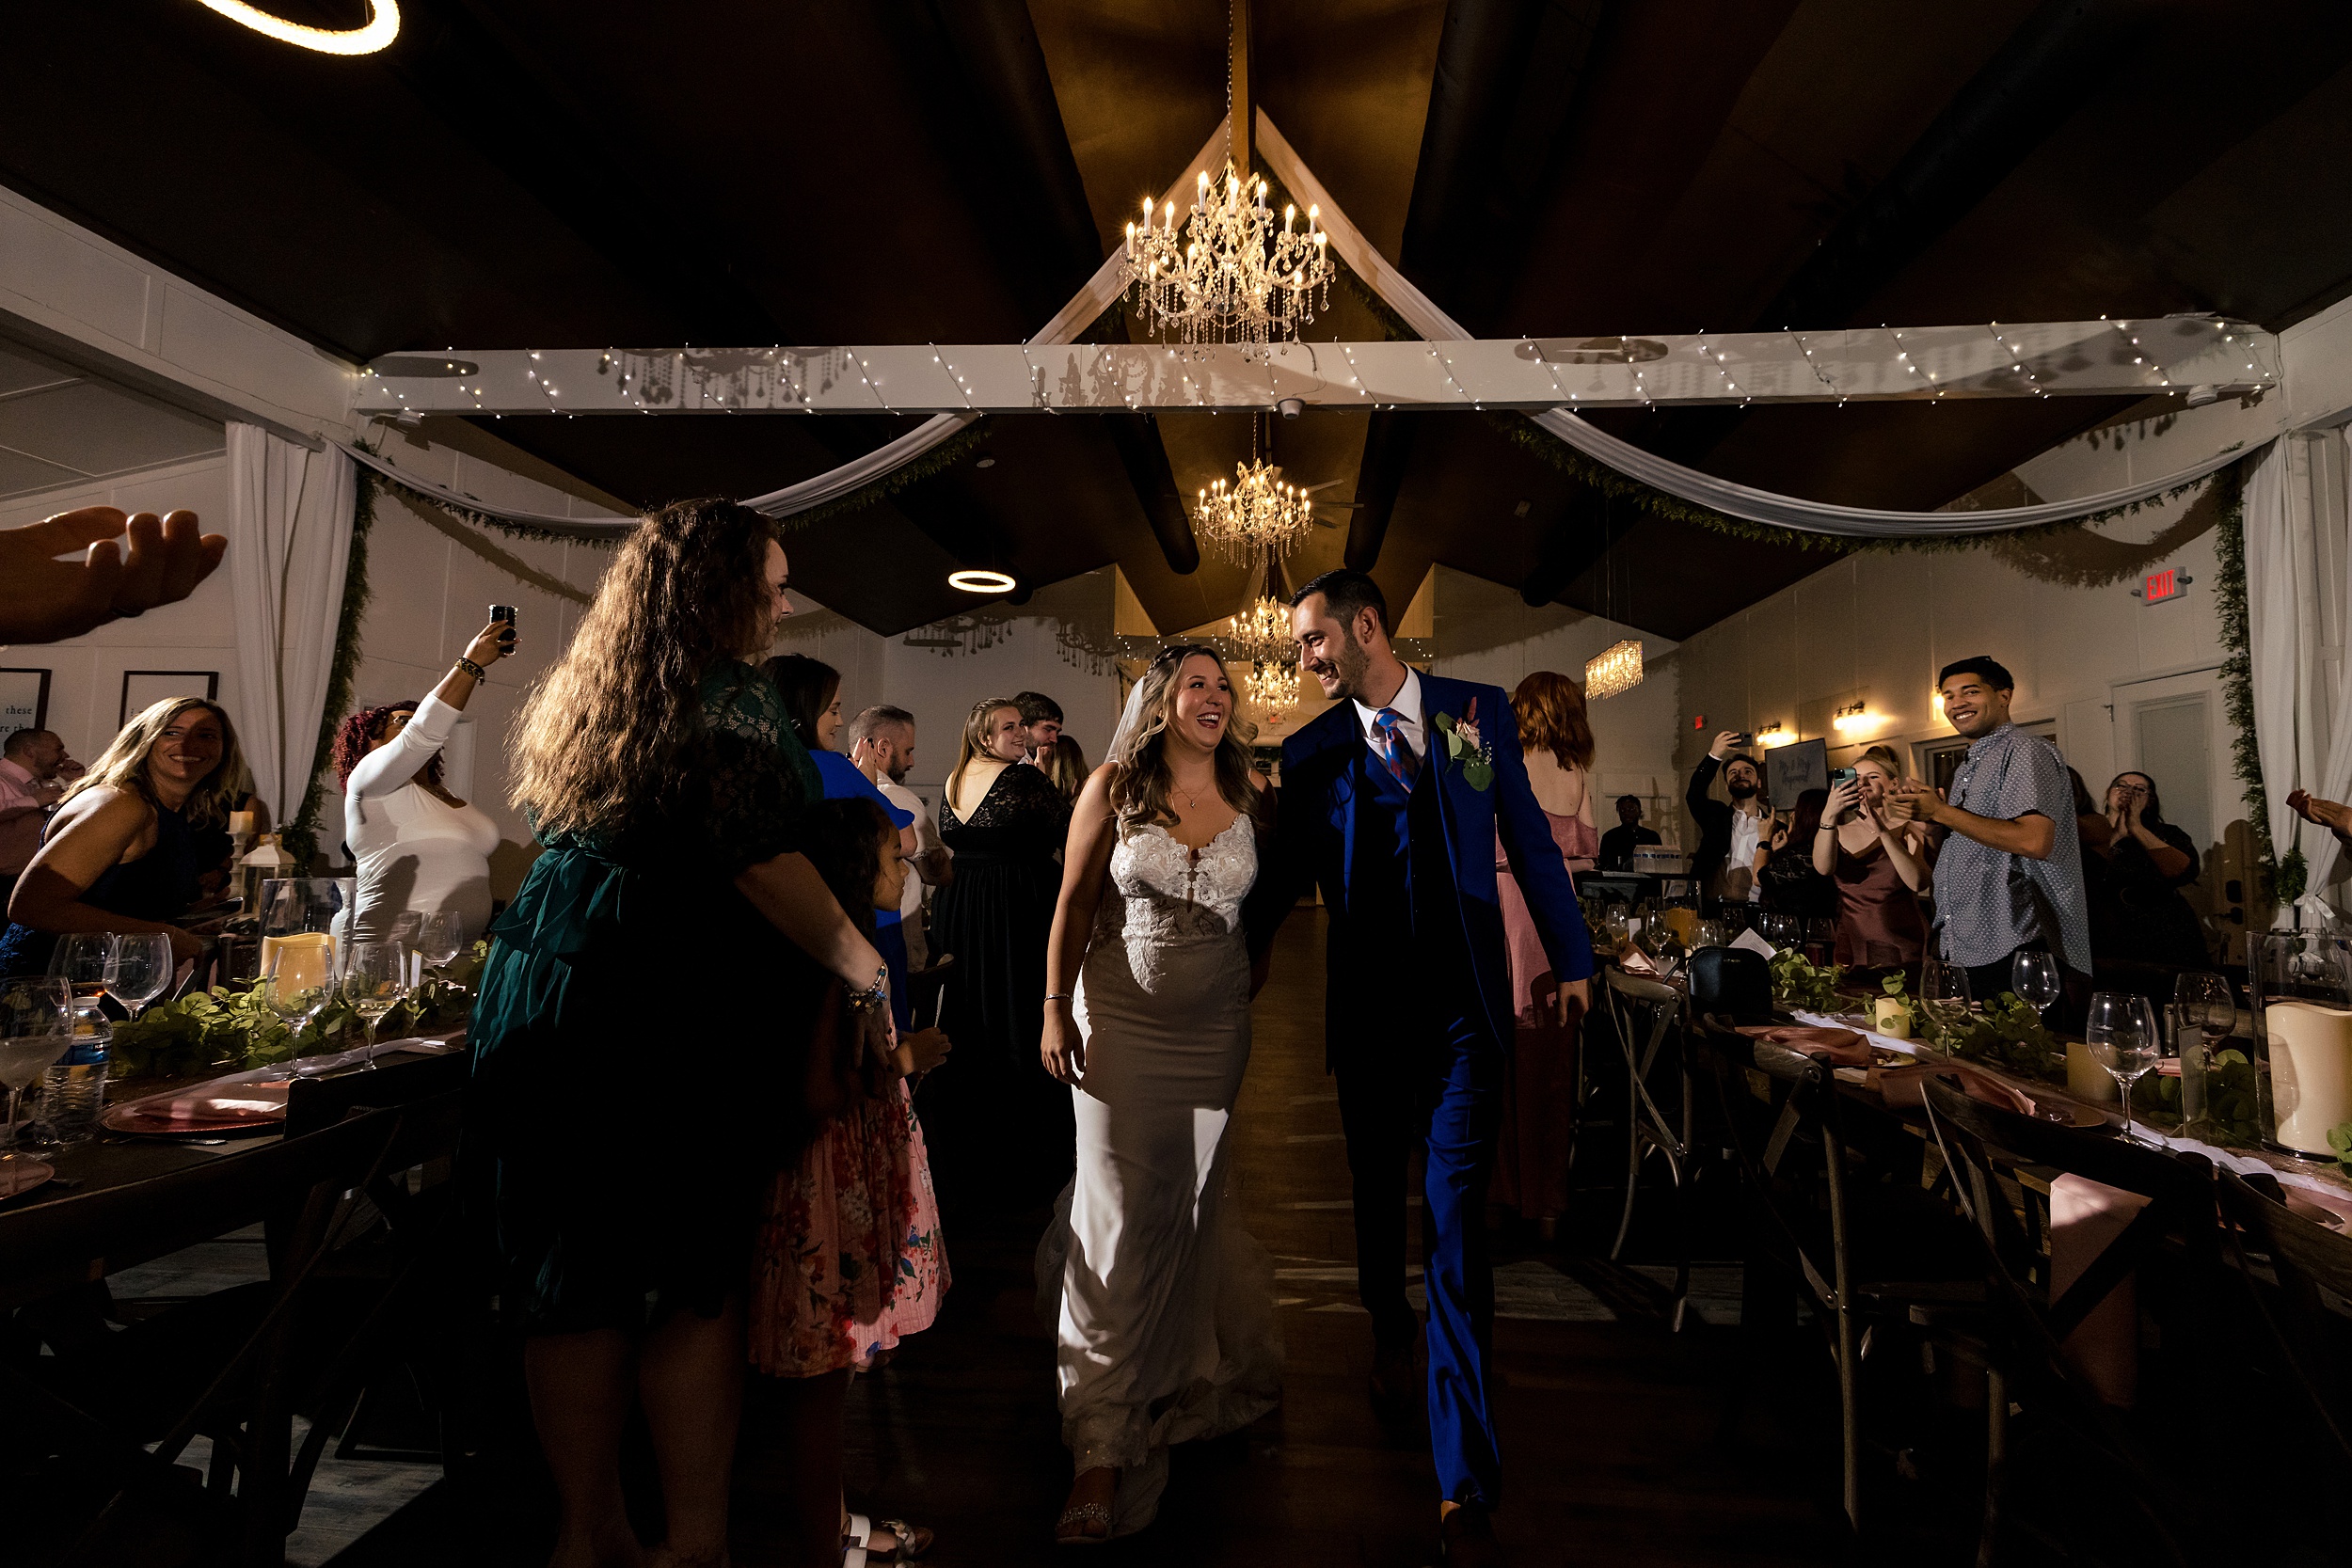 Newlyweds enter their wedding reception surrounded by guests